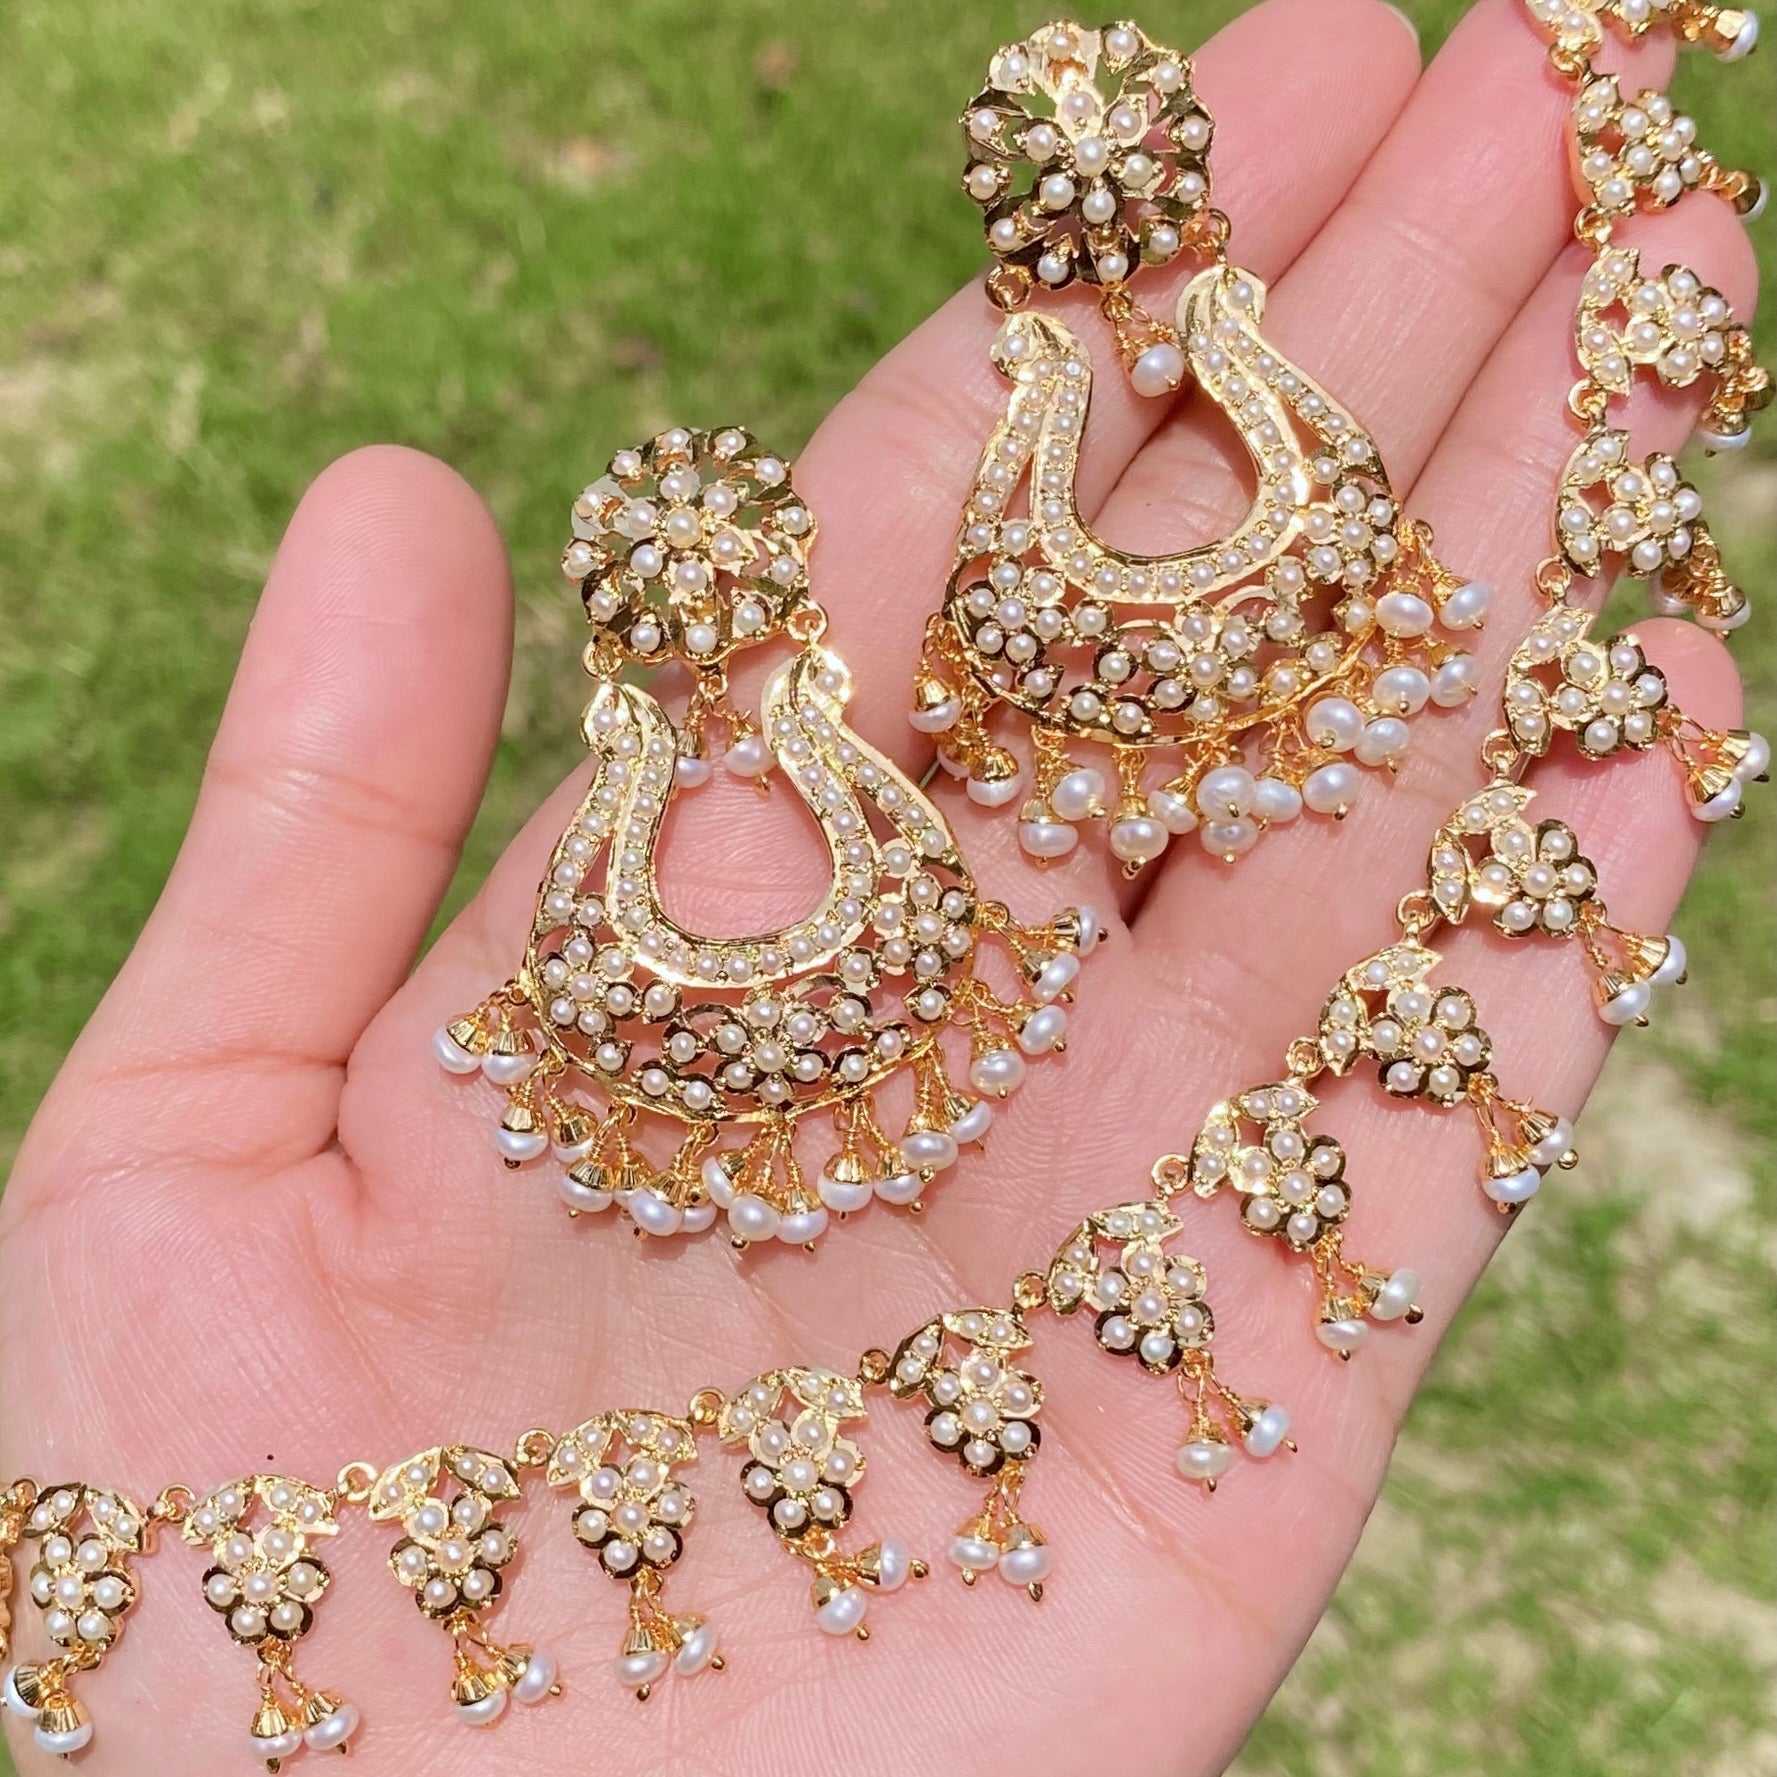 Freshwater Pearl Jewelry | Heritage Hyderabadi Handcraft | Gold Plated Silver